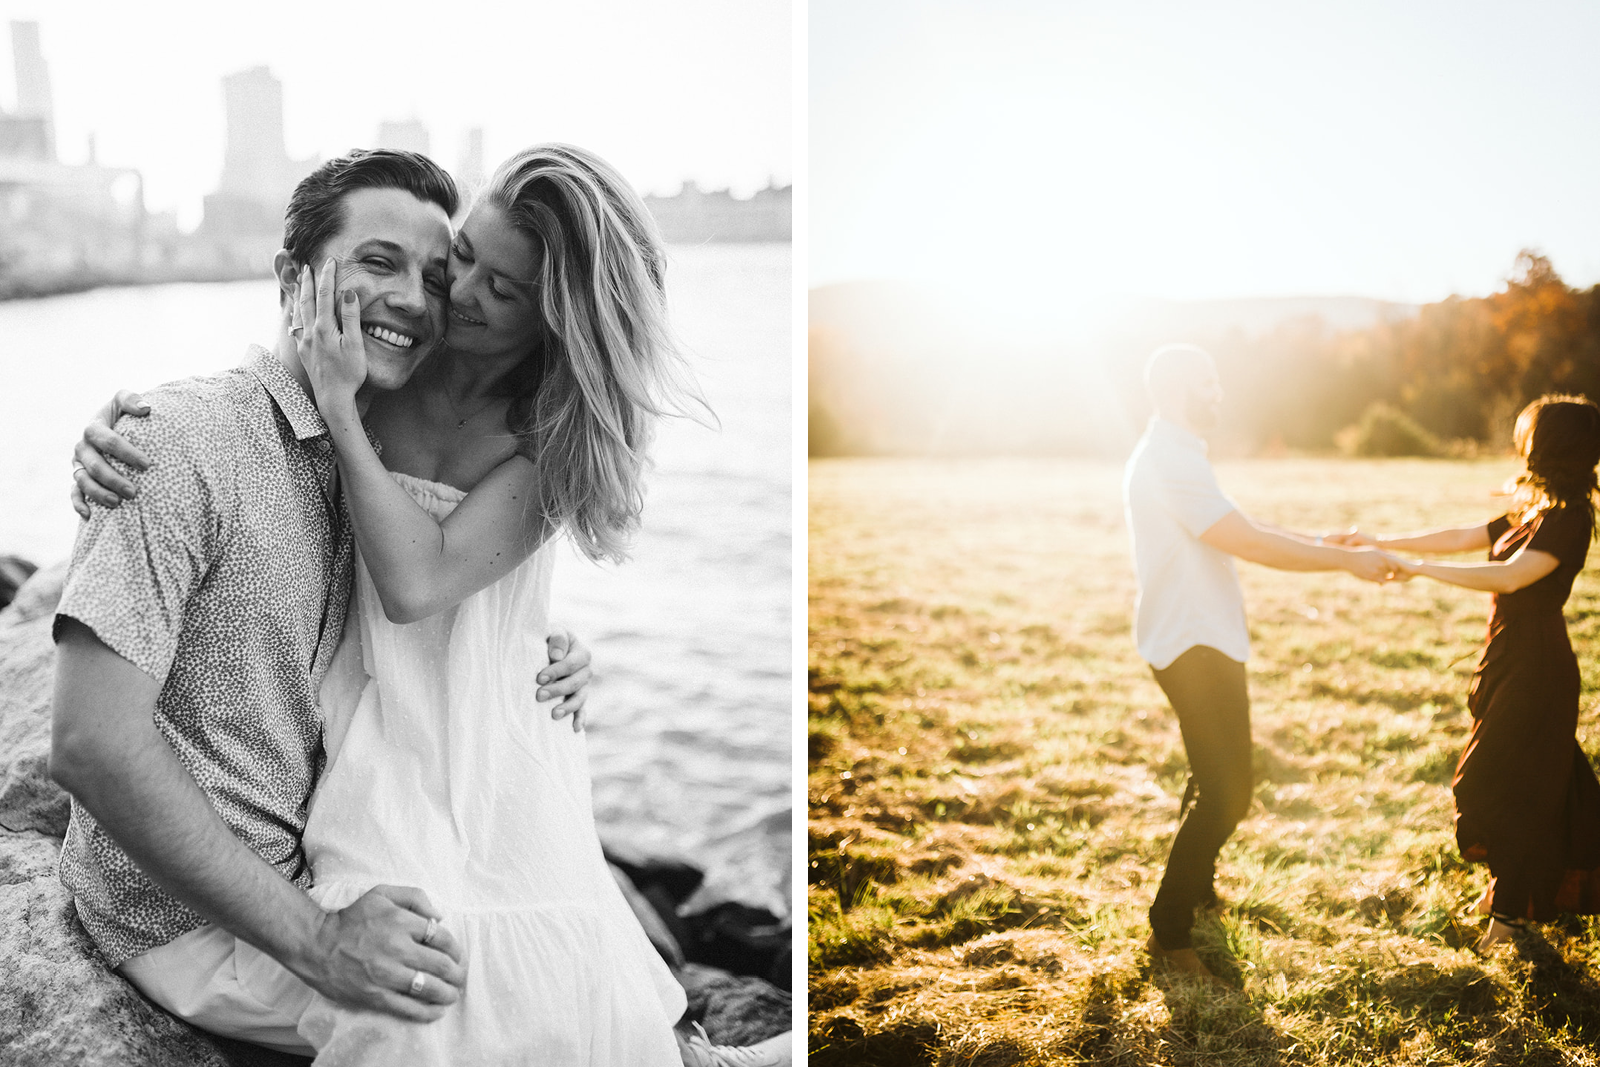 A man and woman pose for engagement photos by dancing together in a field at sunset.